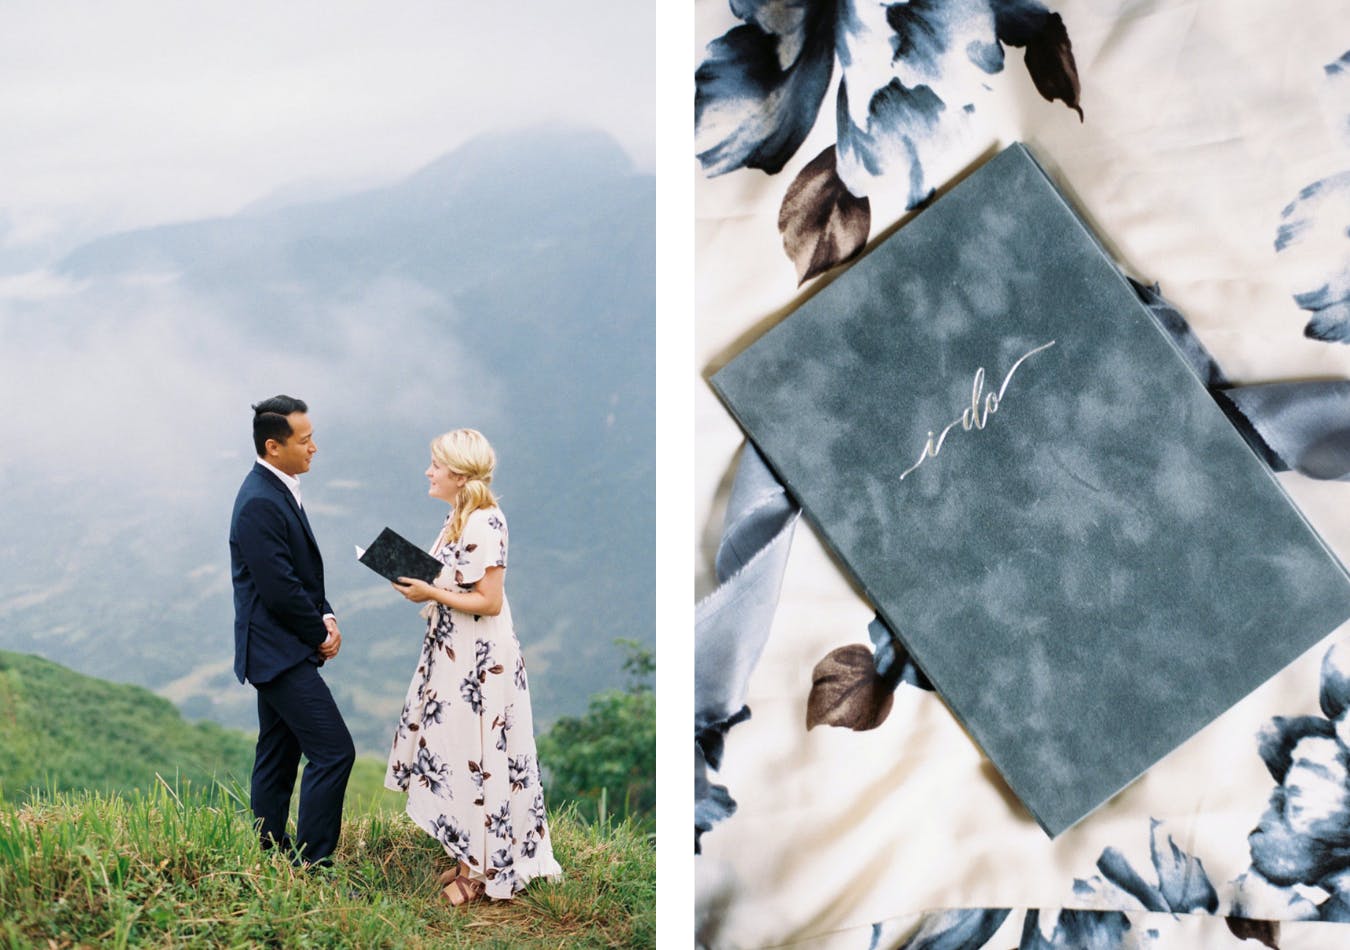 Couples renews vows in mist-filled Vietnamese mountains with custom-made navy vow books | PartySlate